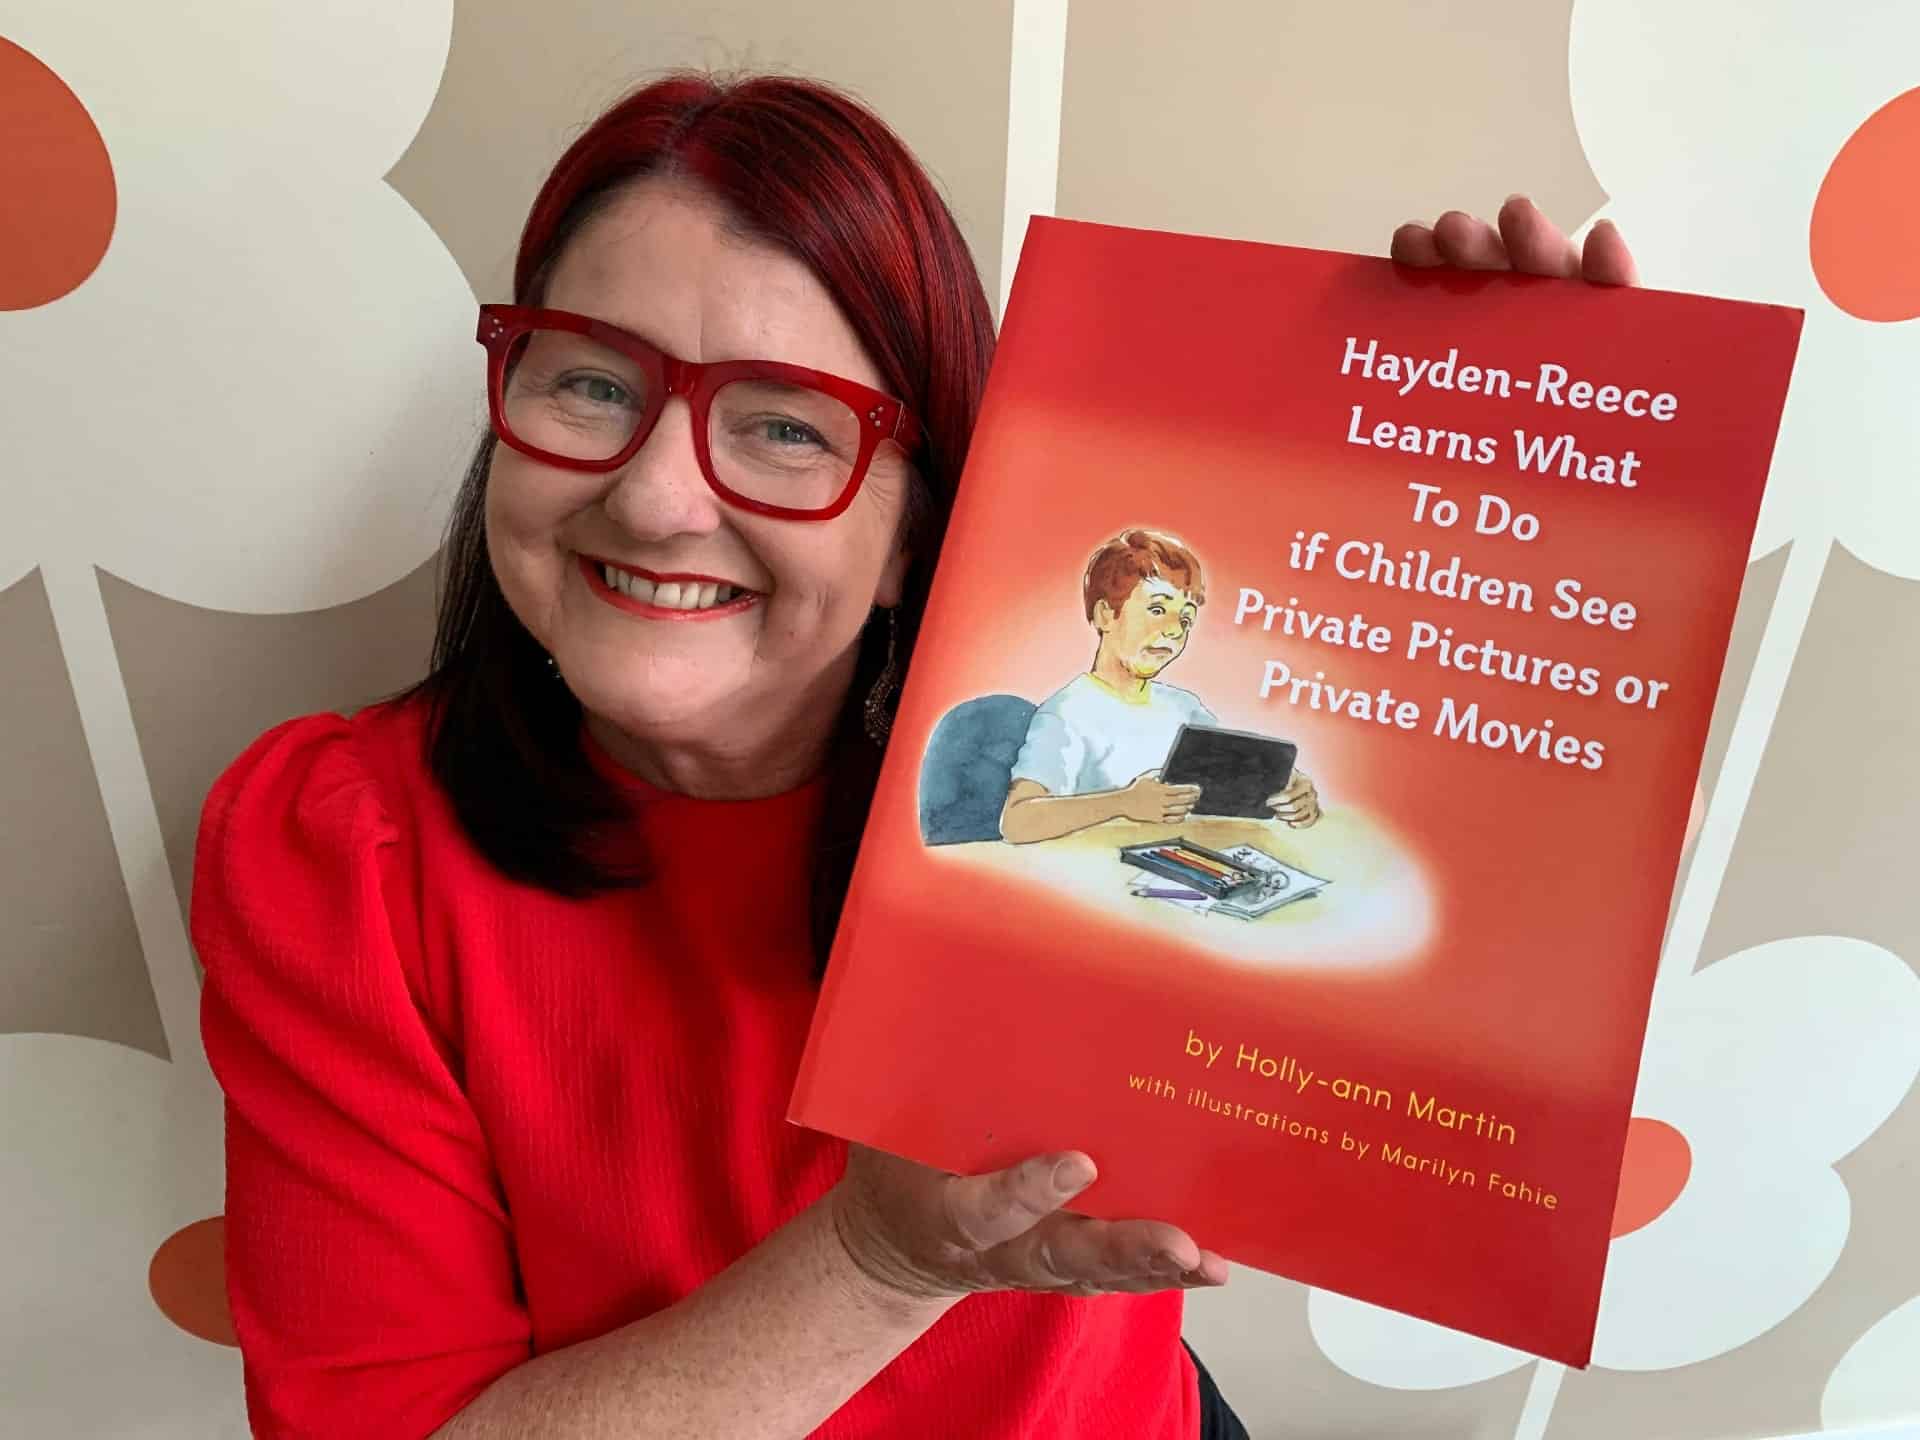 Hayden-Reece Learns What to do if Children See Private Pictures or Private Movies - Book review by Rowena Thomas | 'Amazing Me'